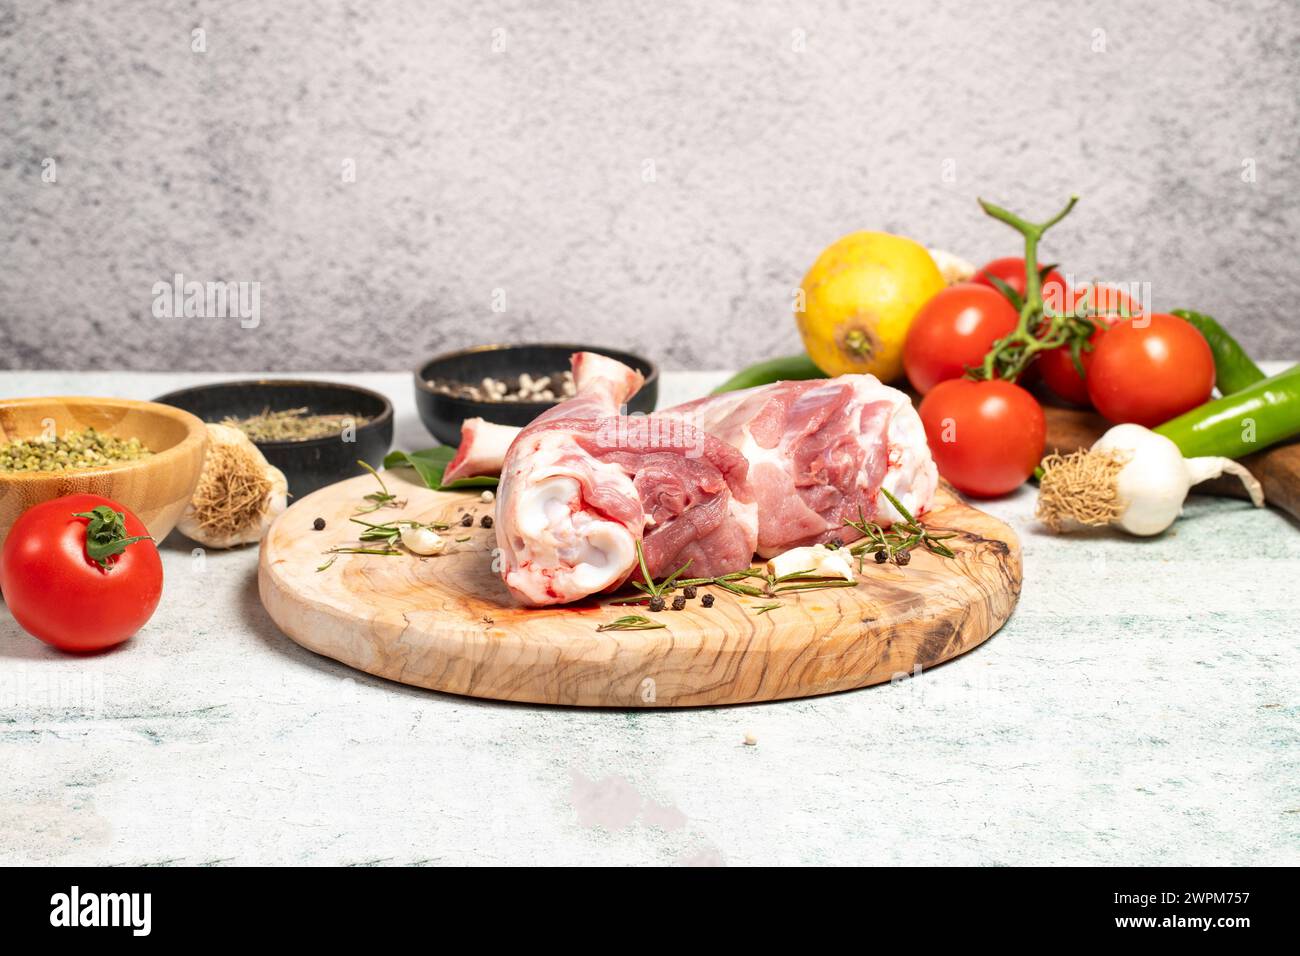 Lamb's shank. Butcher products. Lamb shank steak with bones on stone background Stock Photo